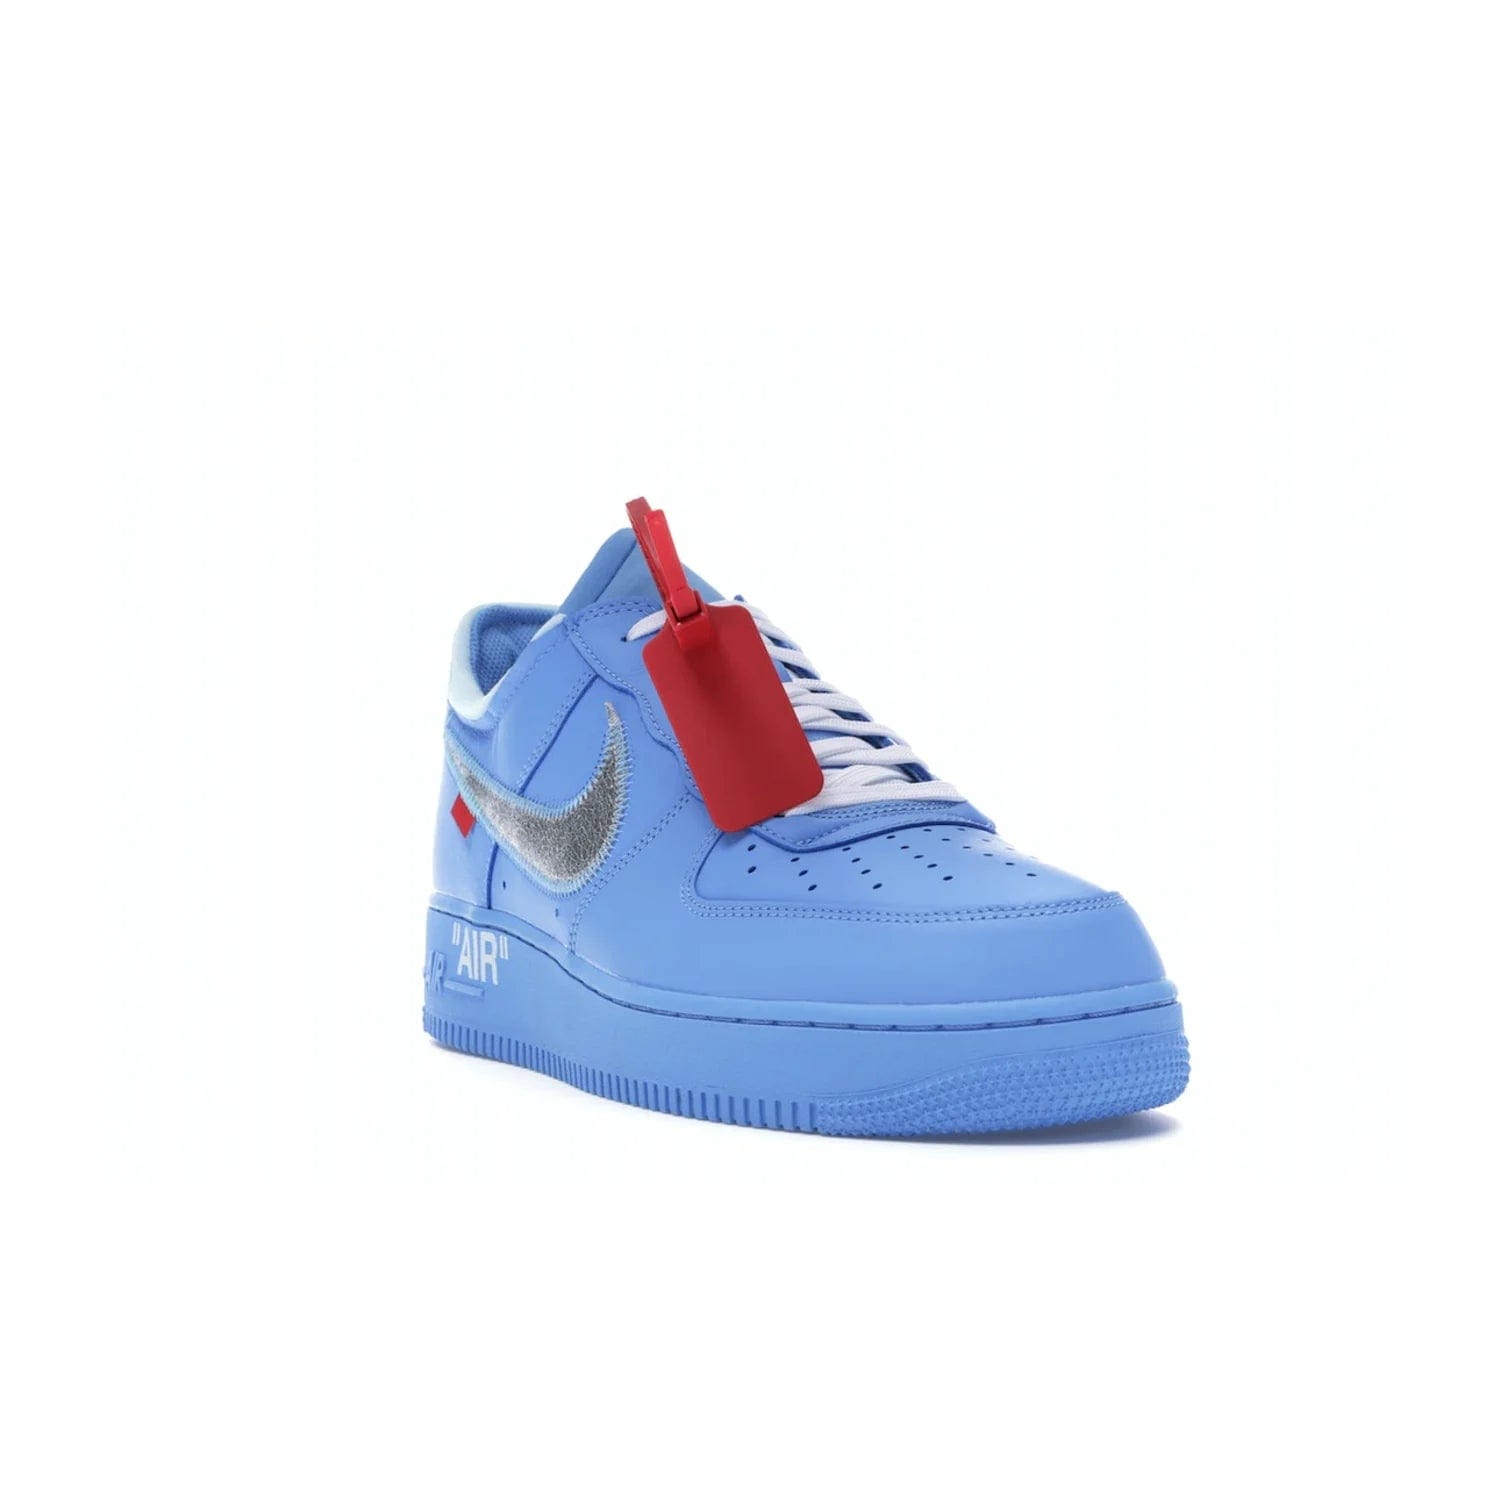 Nike Air Force 1 Low Off-White MCA University Blue - Image 7 - Only at www.BallersClubKickz.com - Virgil Abloh's Air Force 1 Low Off-White MCA University Blue: Features University Blue leather and midsole, reflective silver Nike Swoosh, red zip tie, white laces, and iconic Off-White™ branding. A must-have for any Virgil Abloh enthusiast.